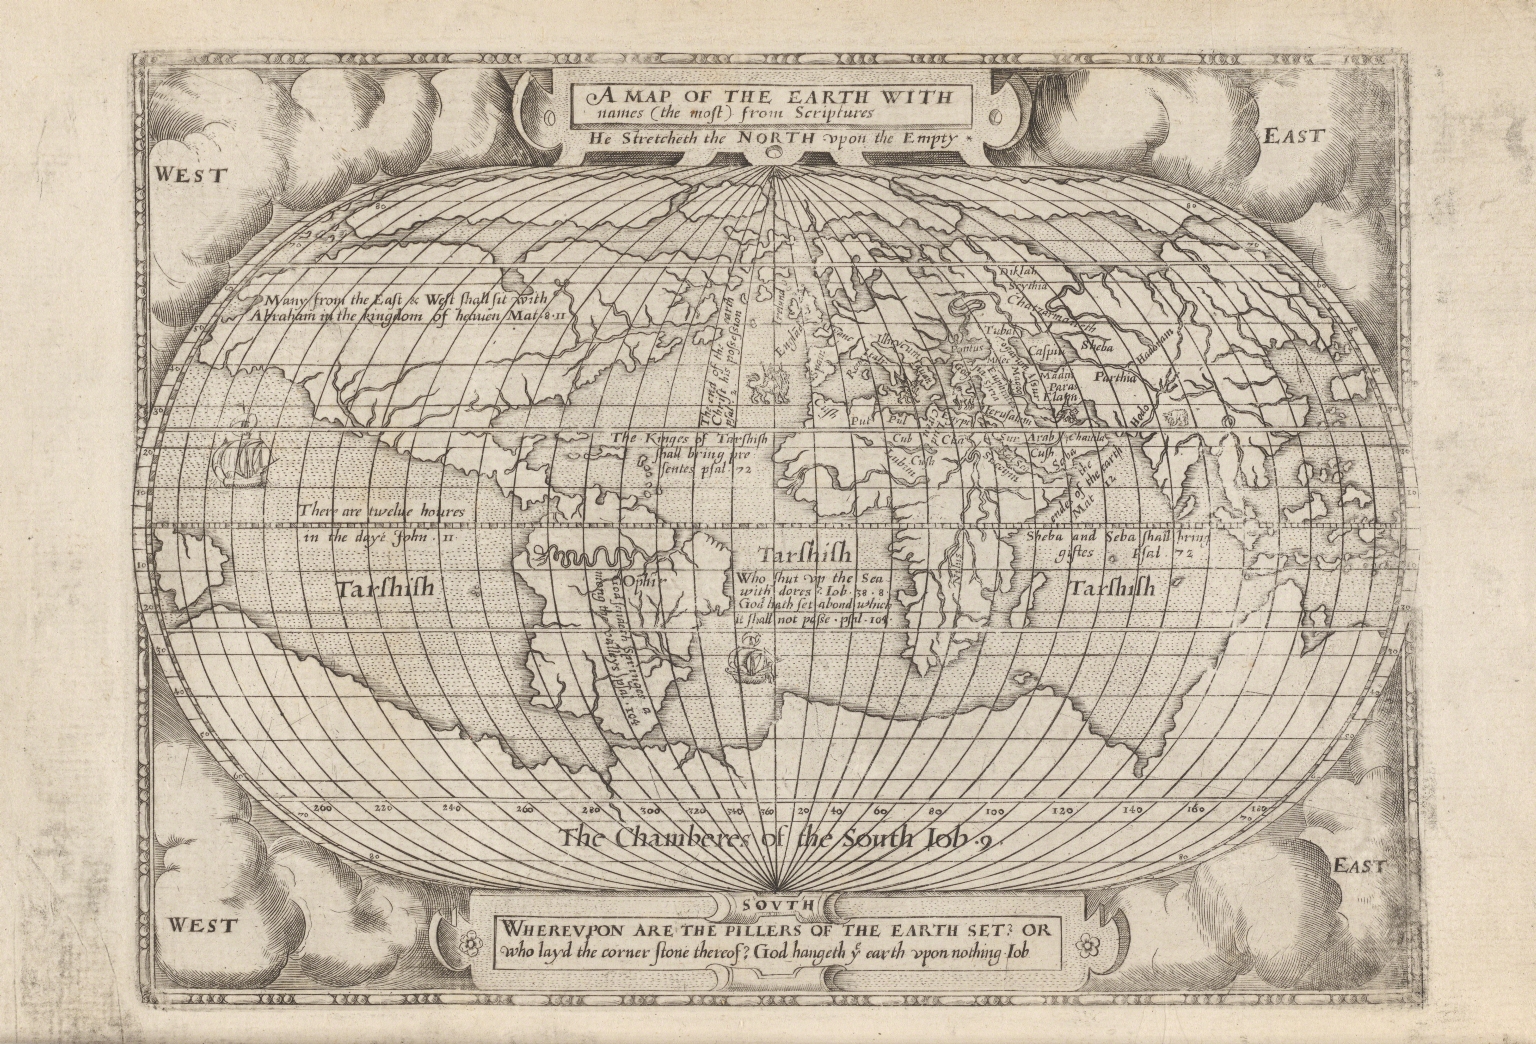 A Map of the earth with names (the most) from scriptures